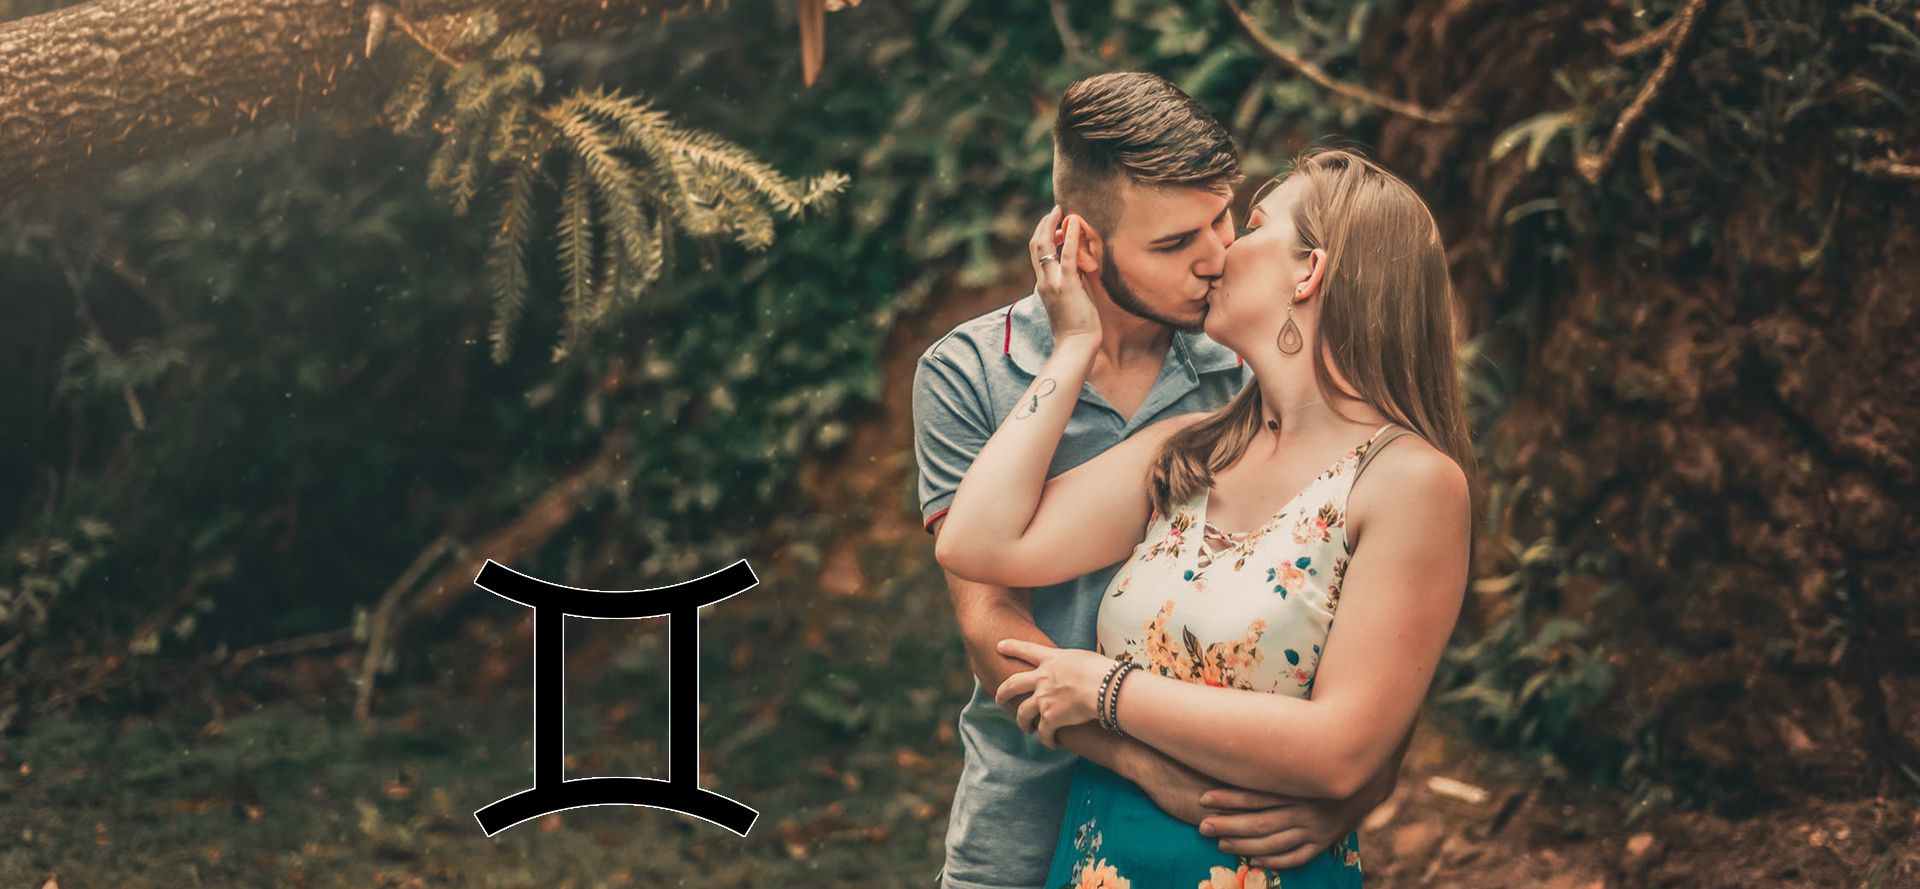 A Gemini man kisses a woman in the forest.